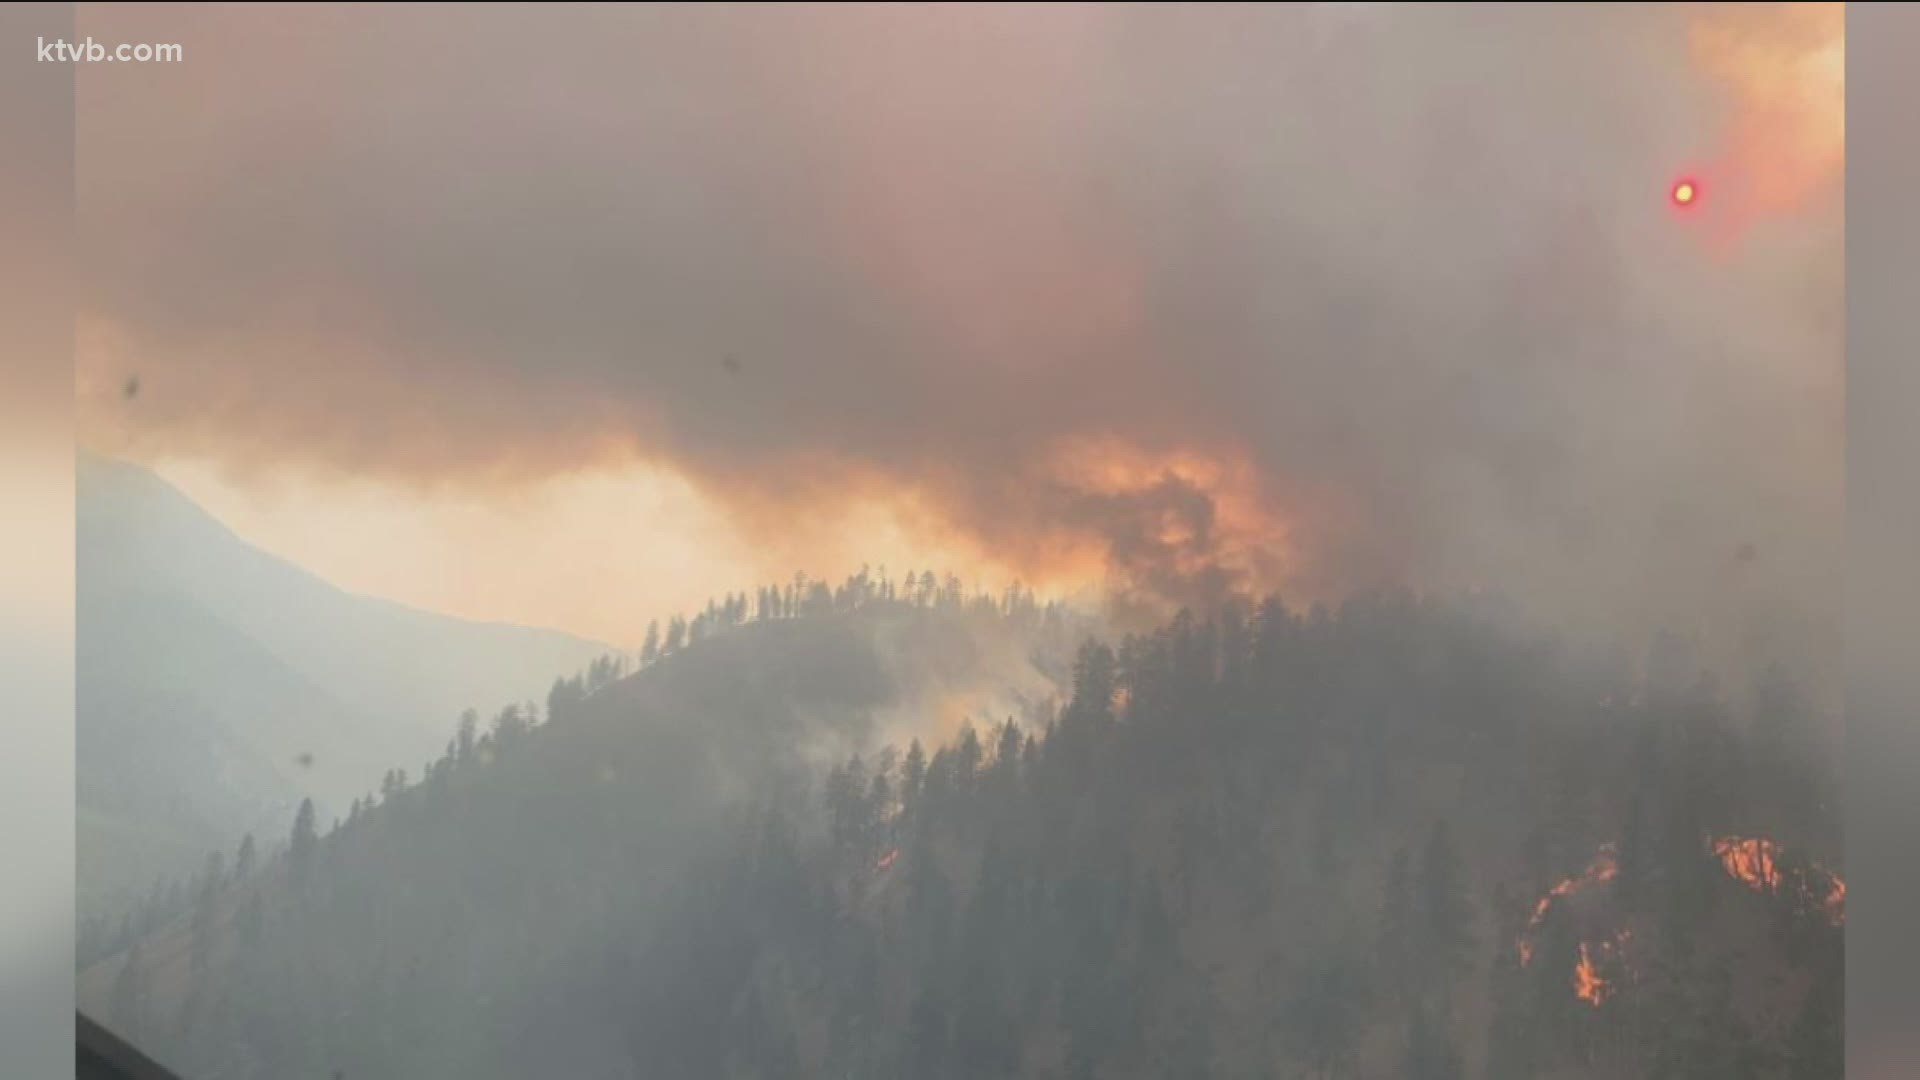 The latest Idaho wildfire updates from Saturday, July 17.